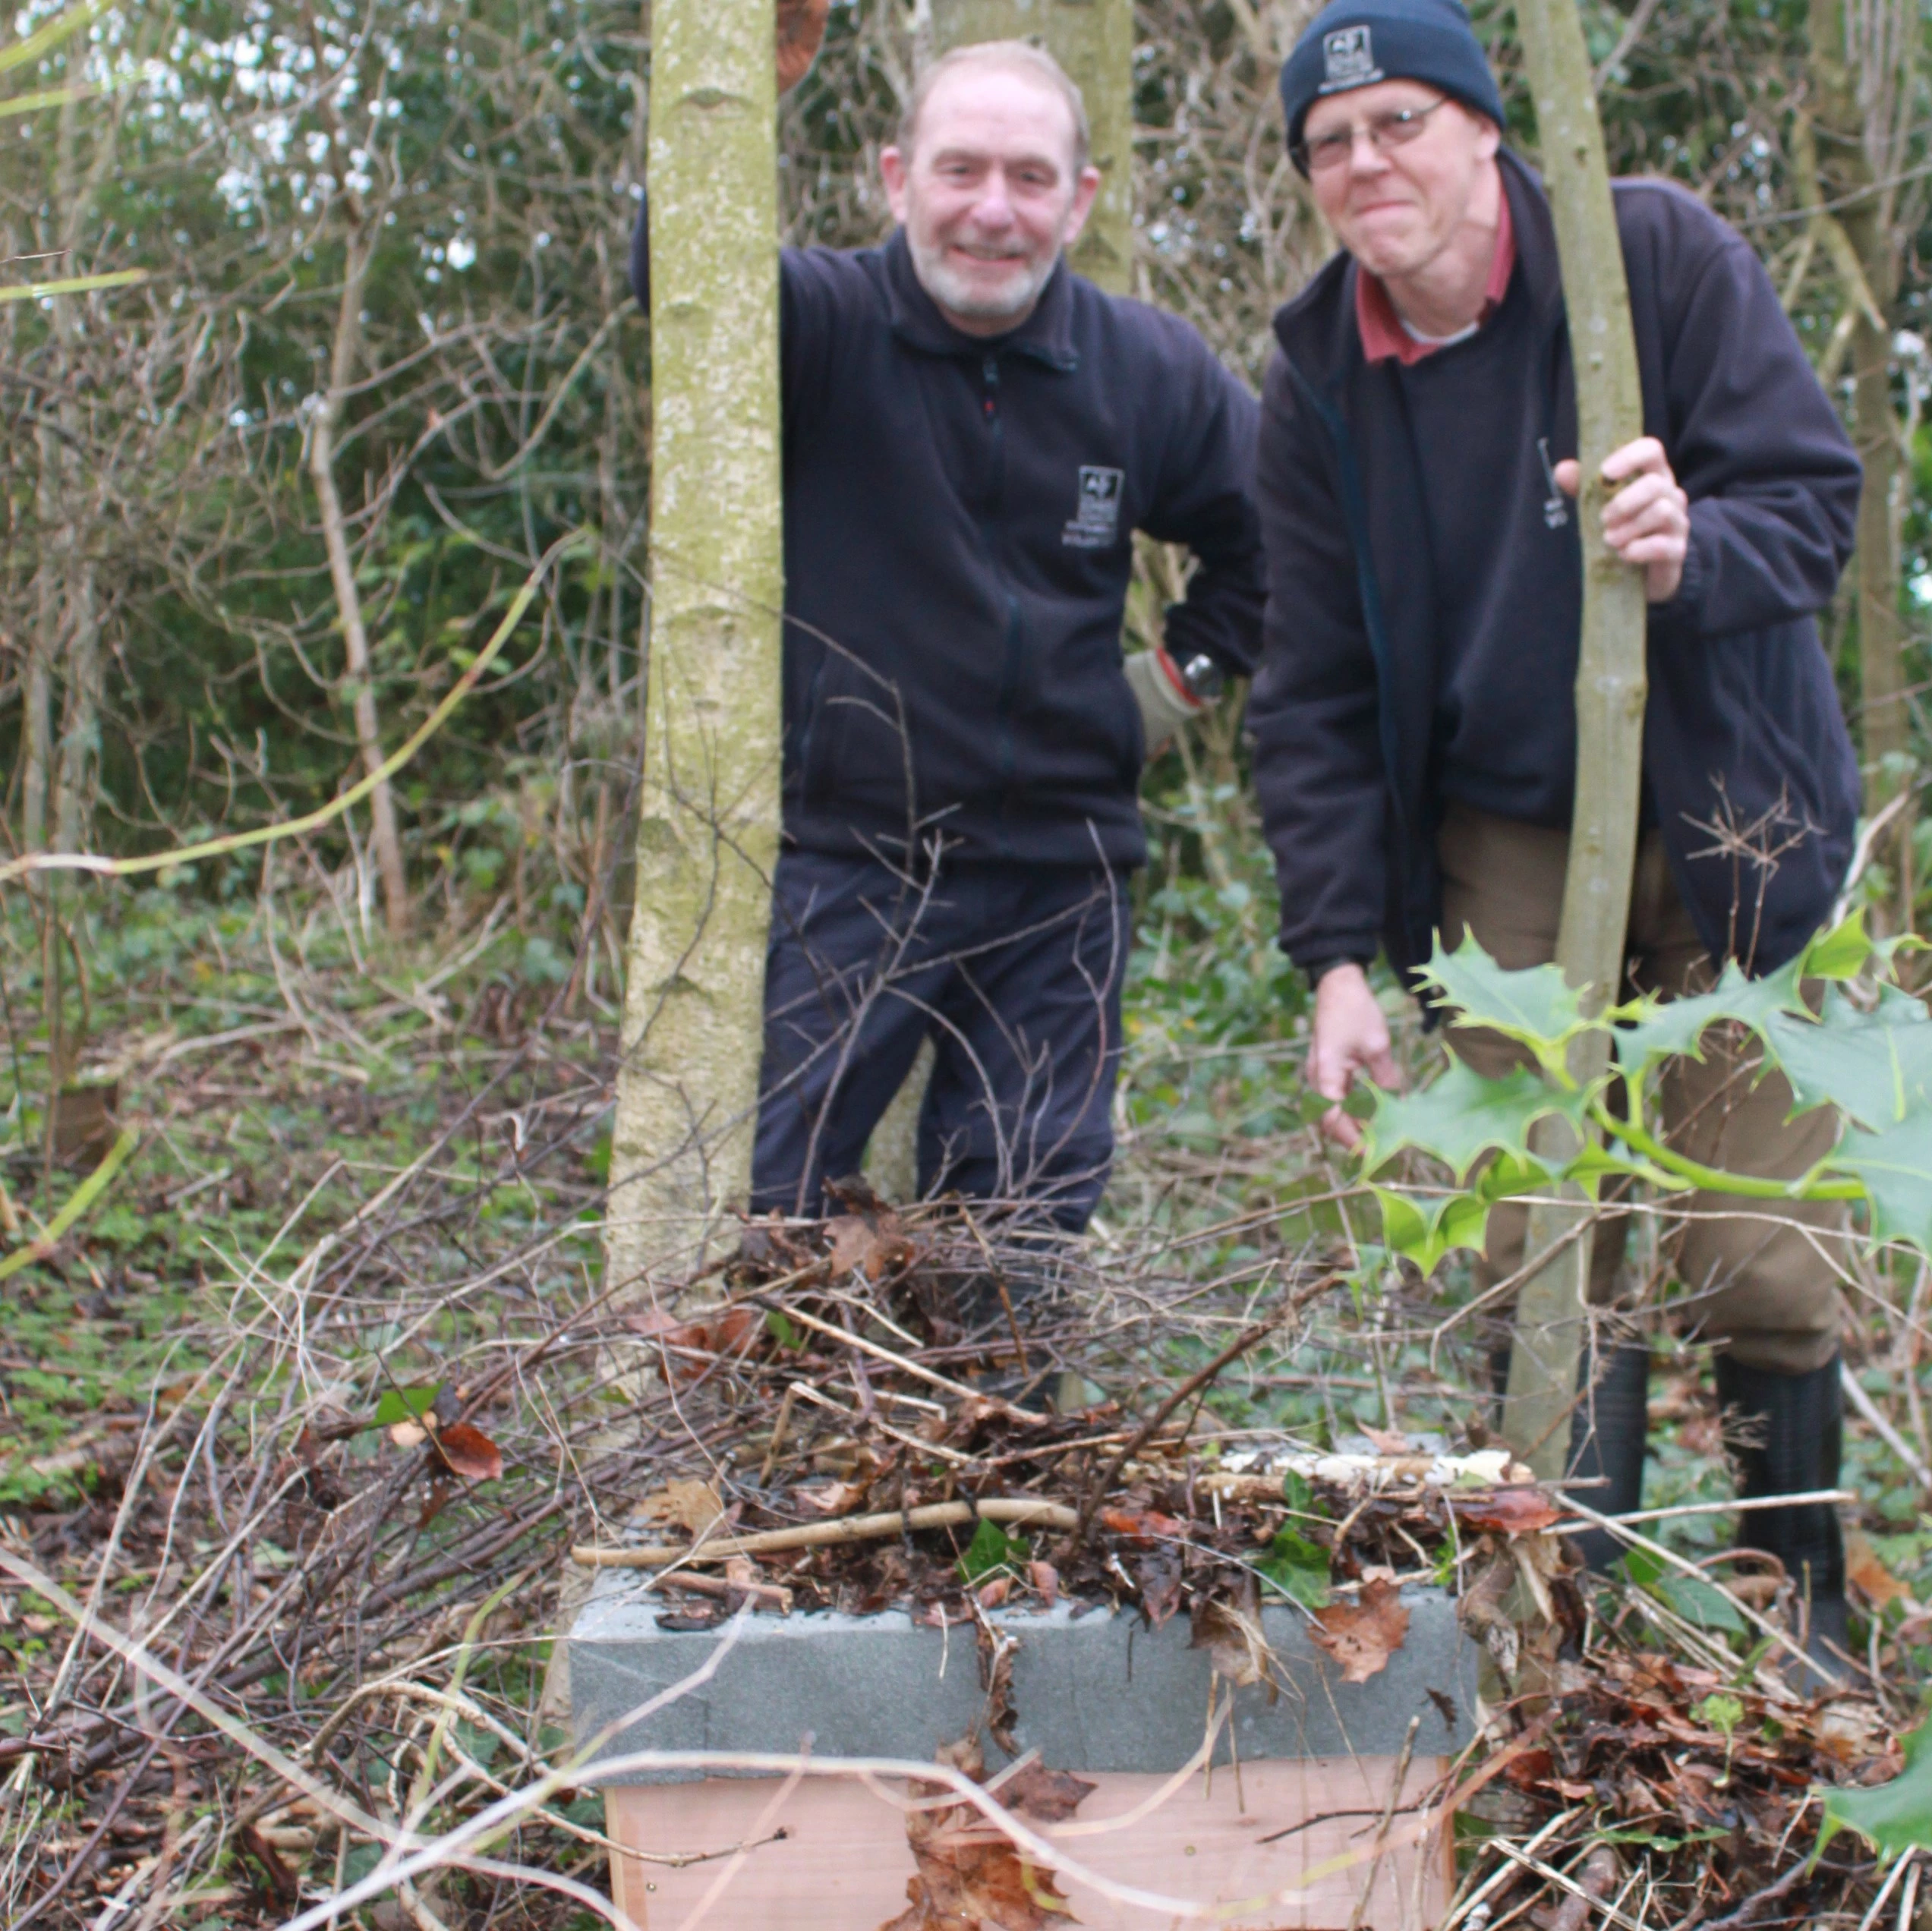 Northumberland Wildlife Trust Gardening Volunteers Derek Statton (left) and Joe Christie (right) with one of the hedgehog boxes made by the Newcastle Bridges School pupil.